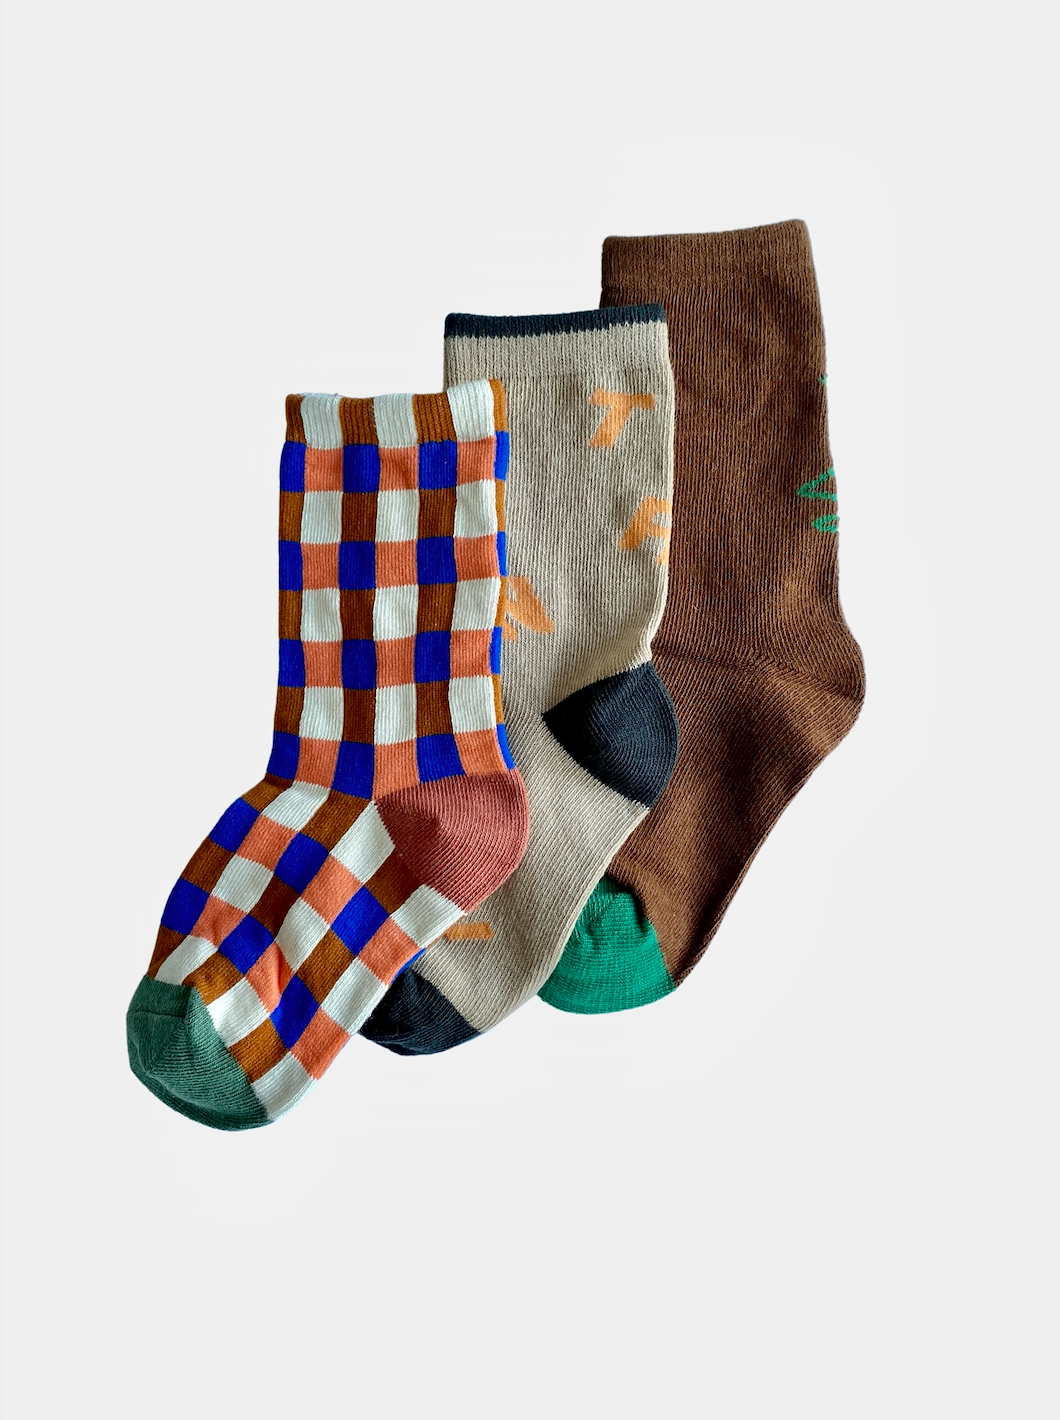 A trio of kids' ankle socks; one pair in an orange, purple and brown check with green toes; one pair in cream with yellow zigzags and black toes, heel and top; one pair in brown with green toes